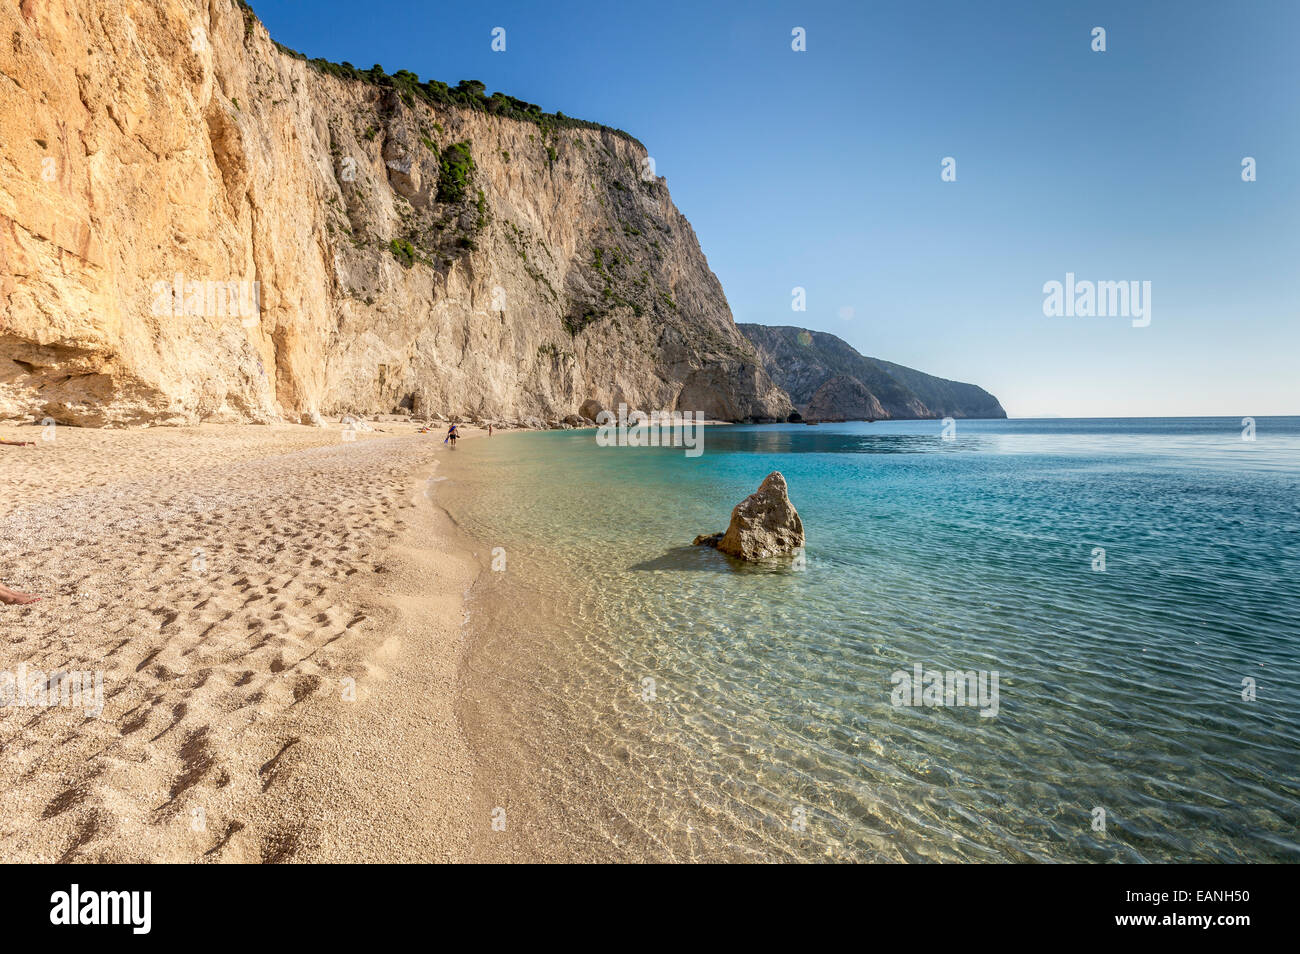 Porto Katsiki beach on the island of Lefkada or Lefkas in Greece. Taken in October when the crowds have gone. Stock Photo